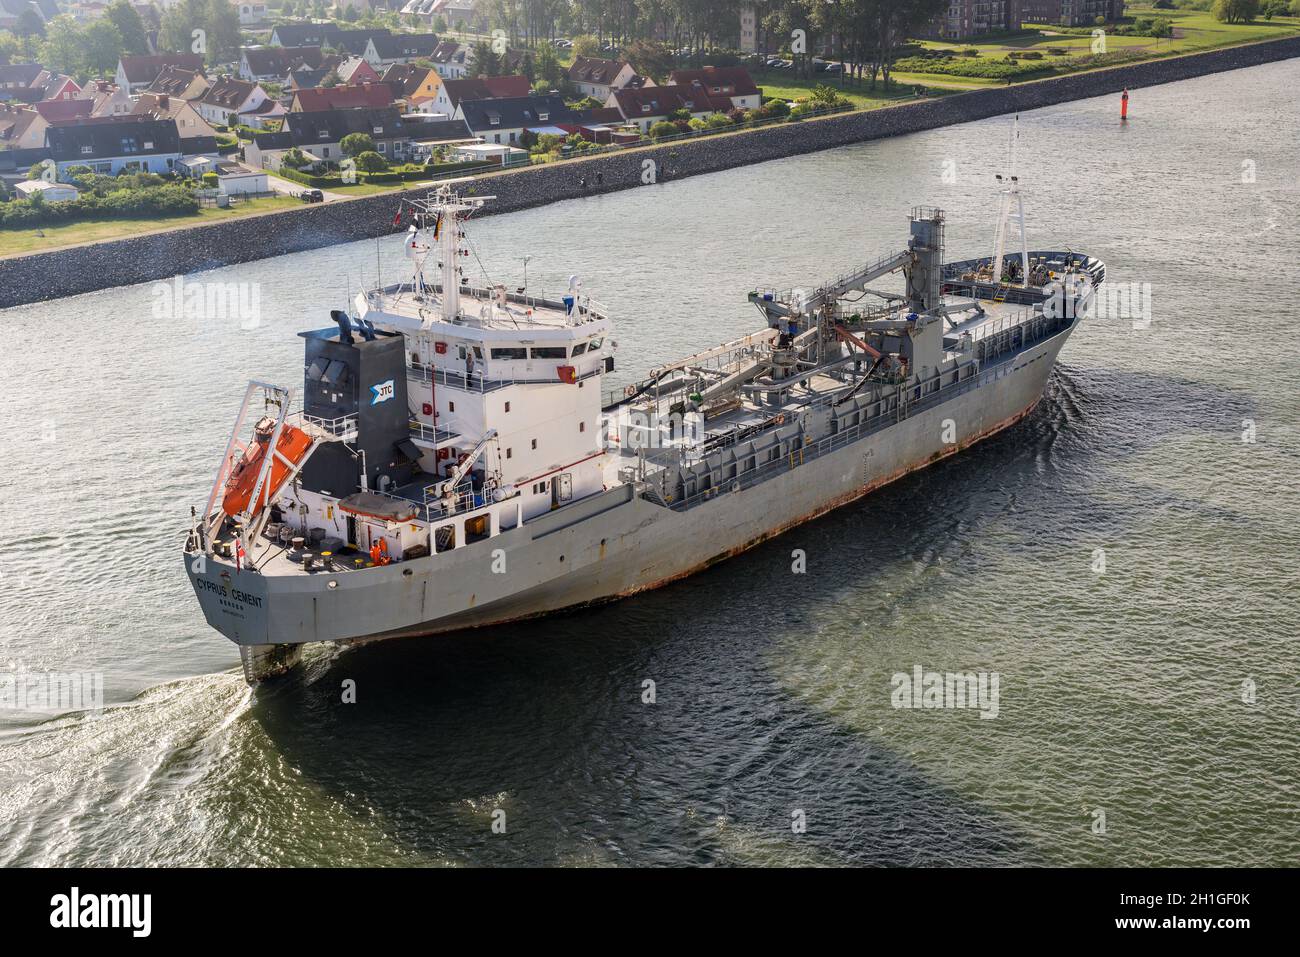 Rostock, Germany - May 26, 2017: The Cement Carrier vessel Cyprus Cement sails to port of Warnemunde, Rostock, Mecklenburg, Germany. Stock Photo